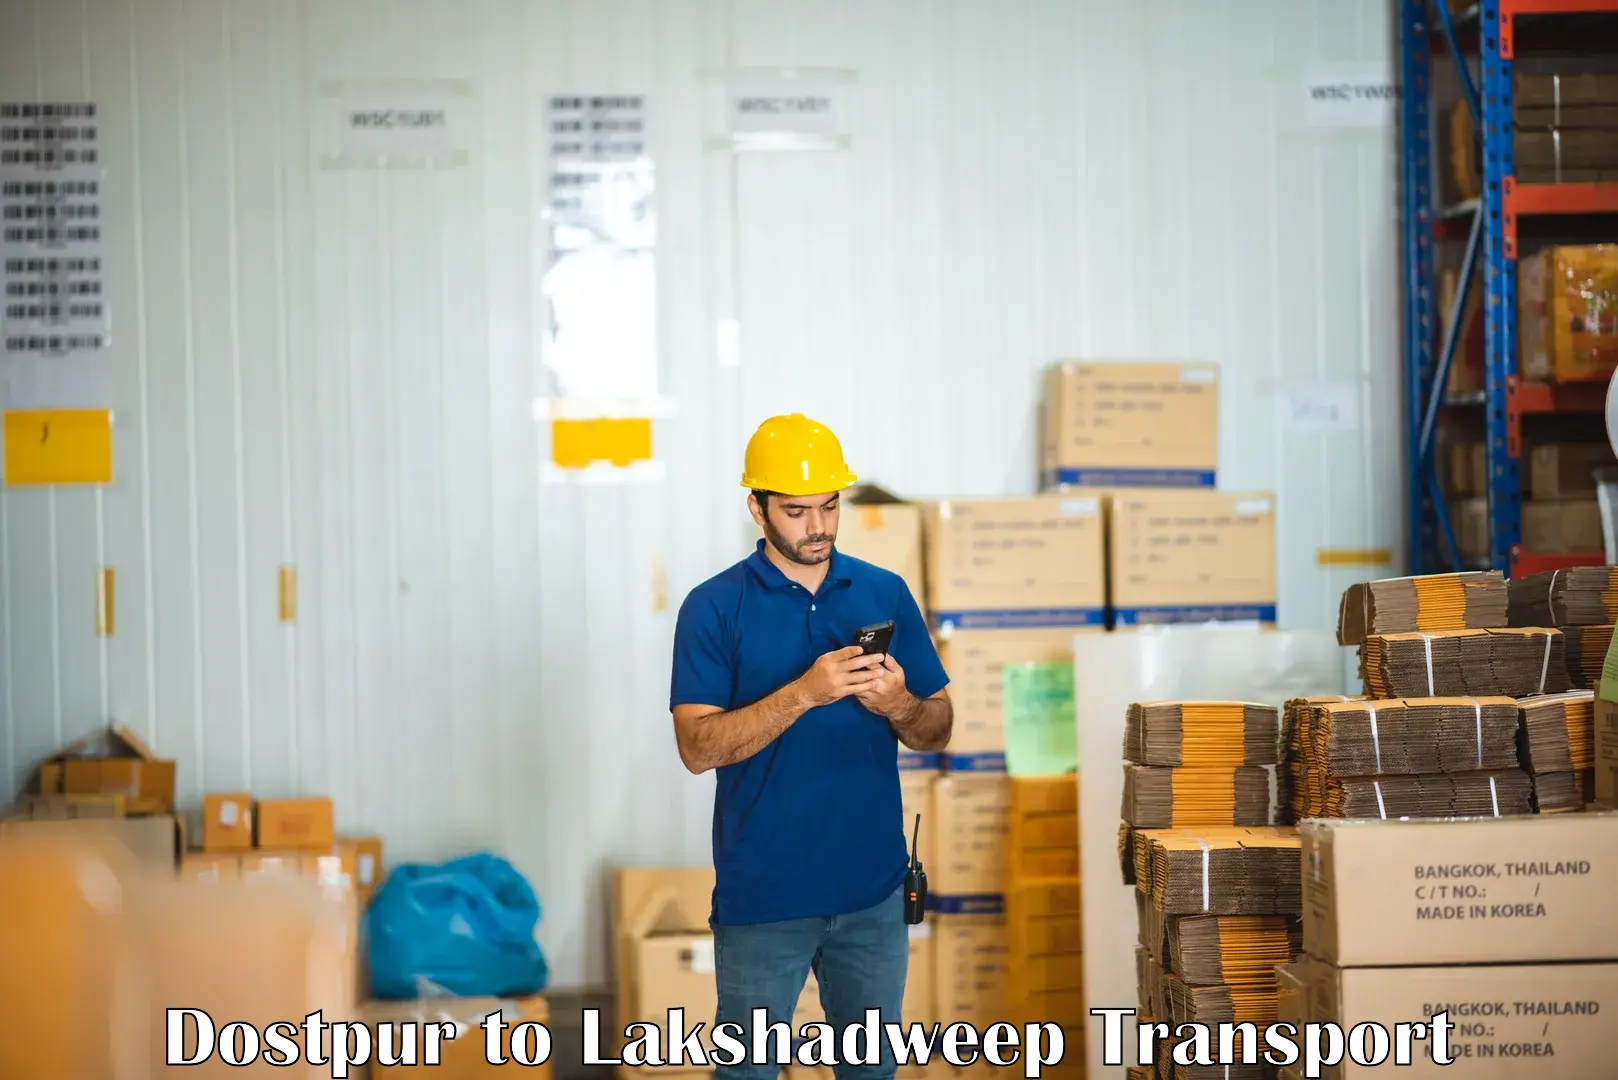 Commercial transport service Dostpur to Lakshadweep